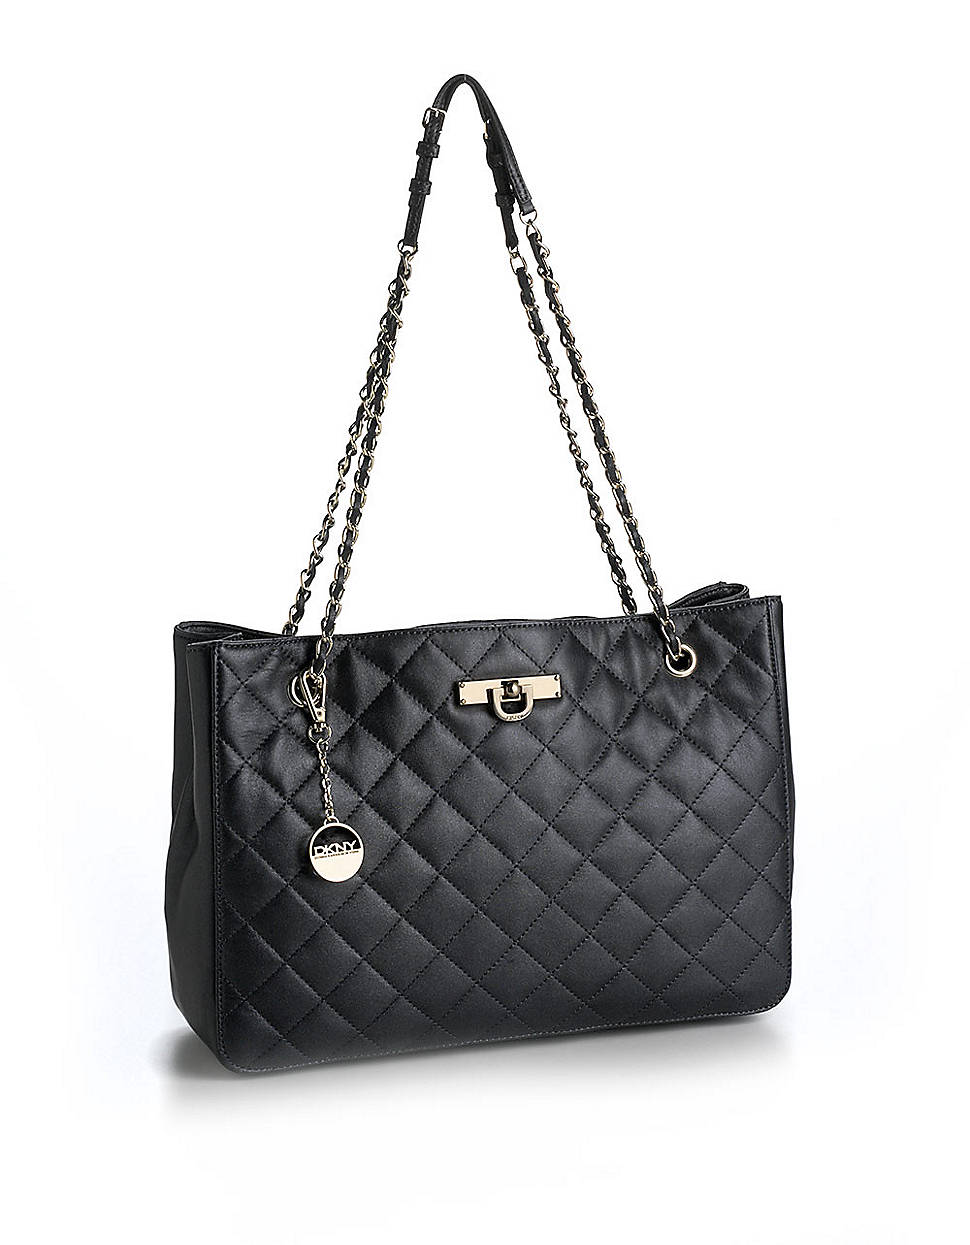 Dkny Quilted Leather Tote Bag in Black | Lyst